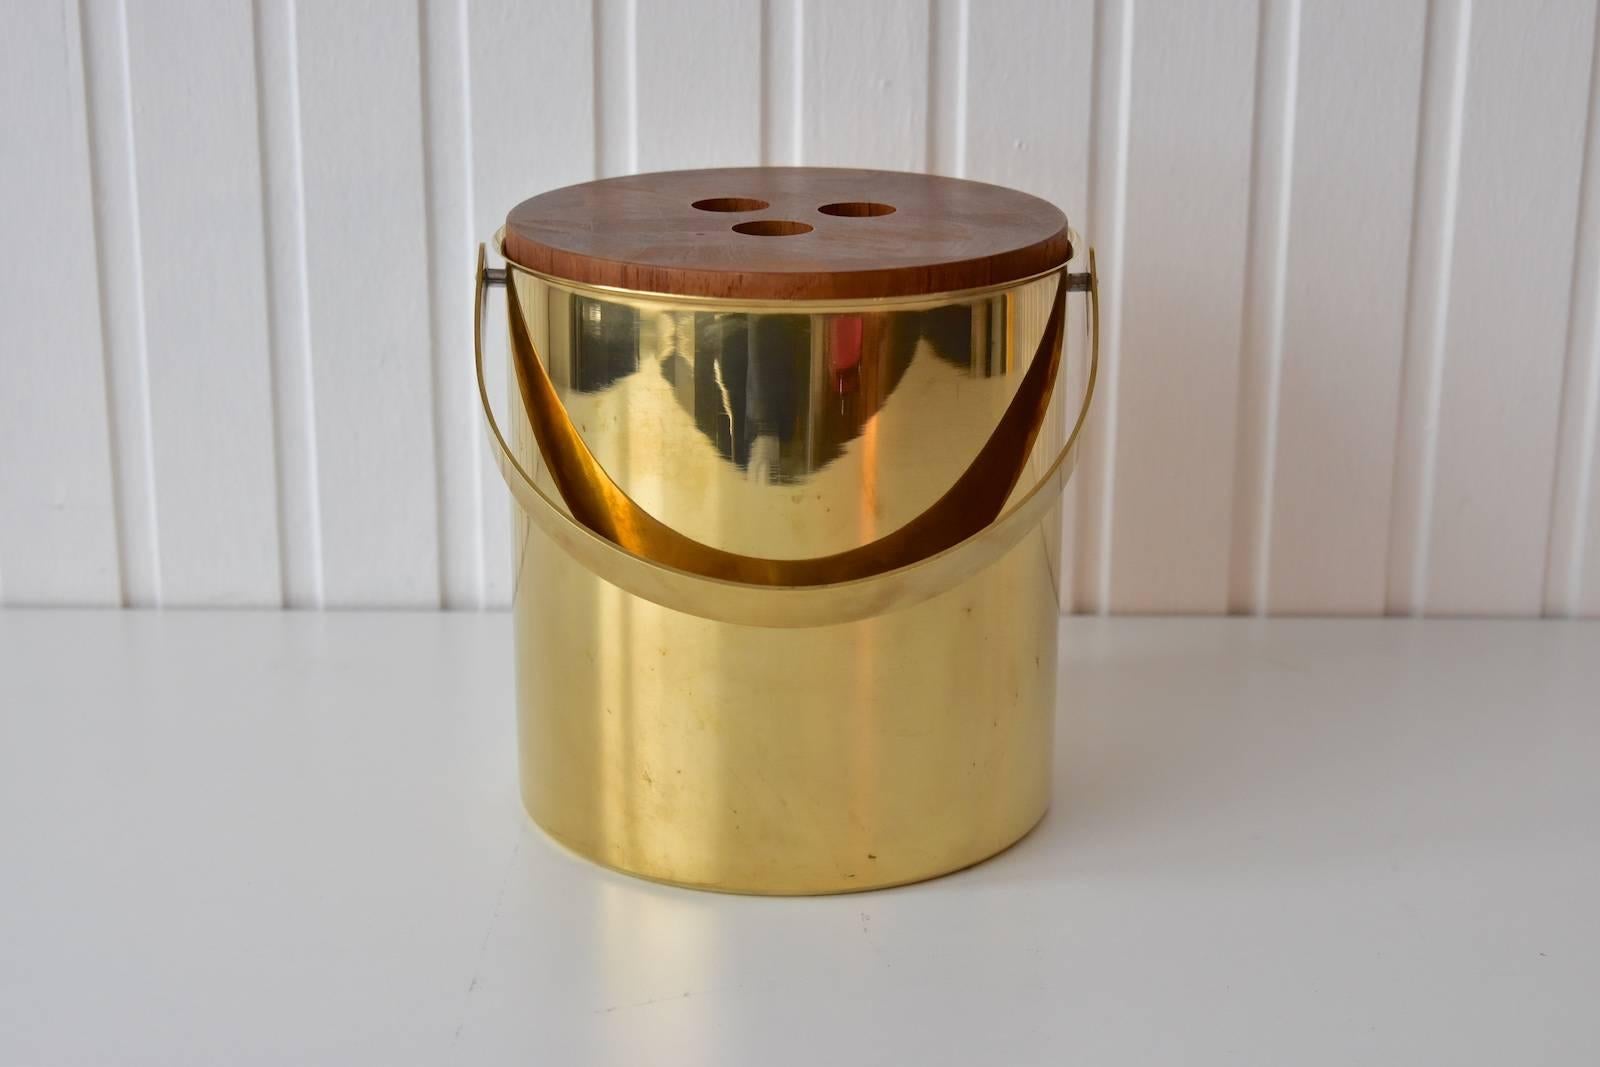 Arne Jacobsen for Stelton ice bucket and tongs. The large ice bucket and tongs are done in brass and teak wood from Stelton.